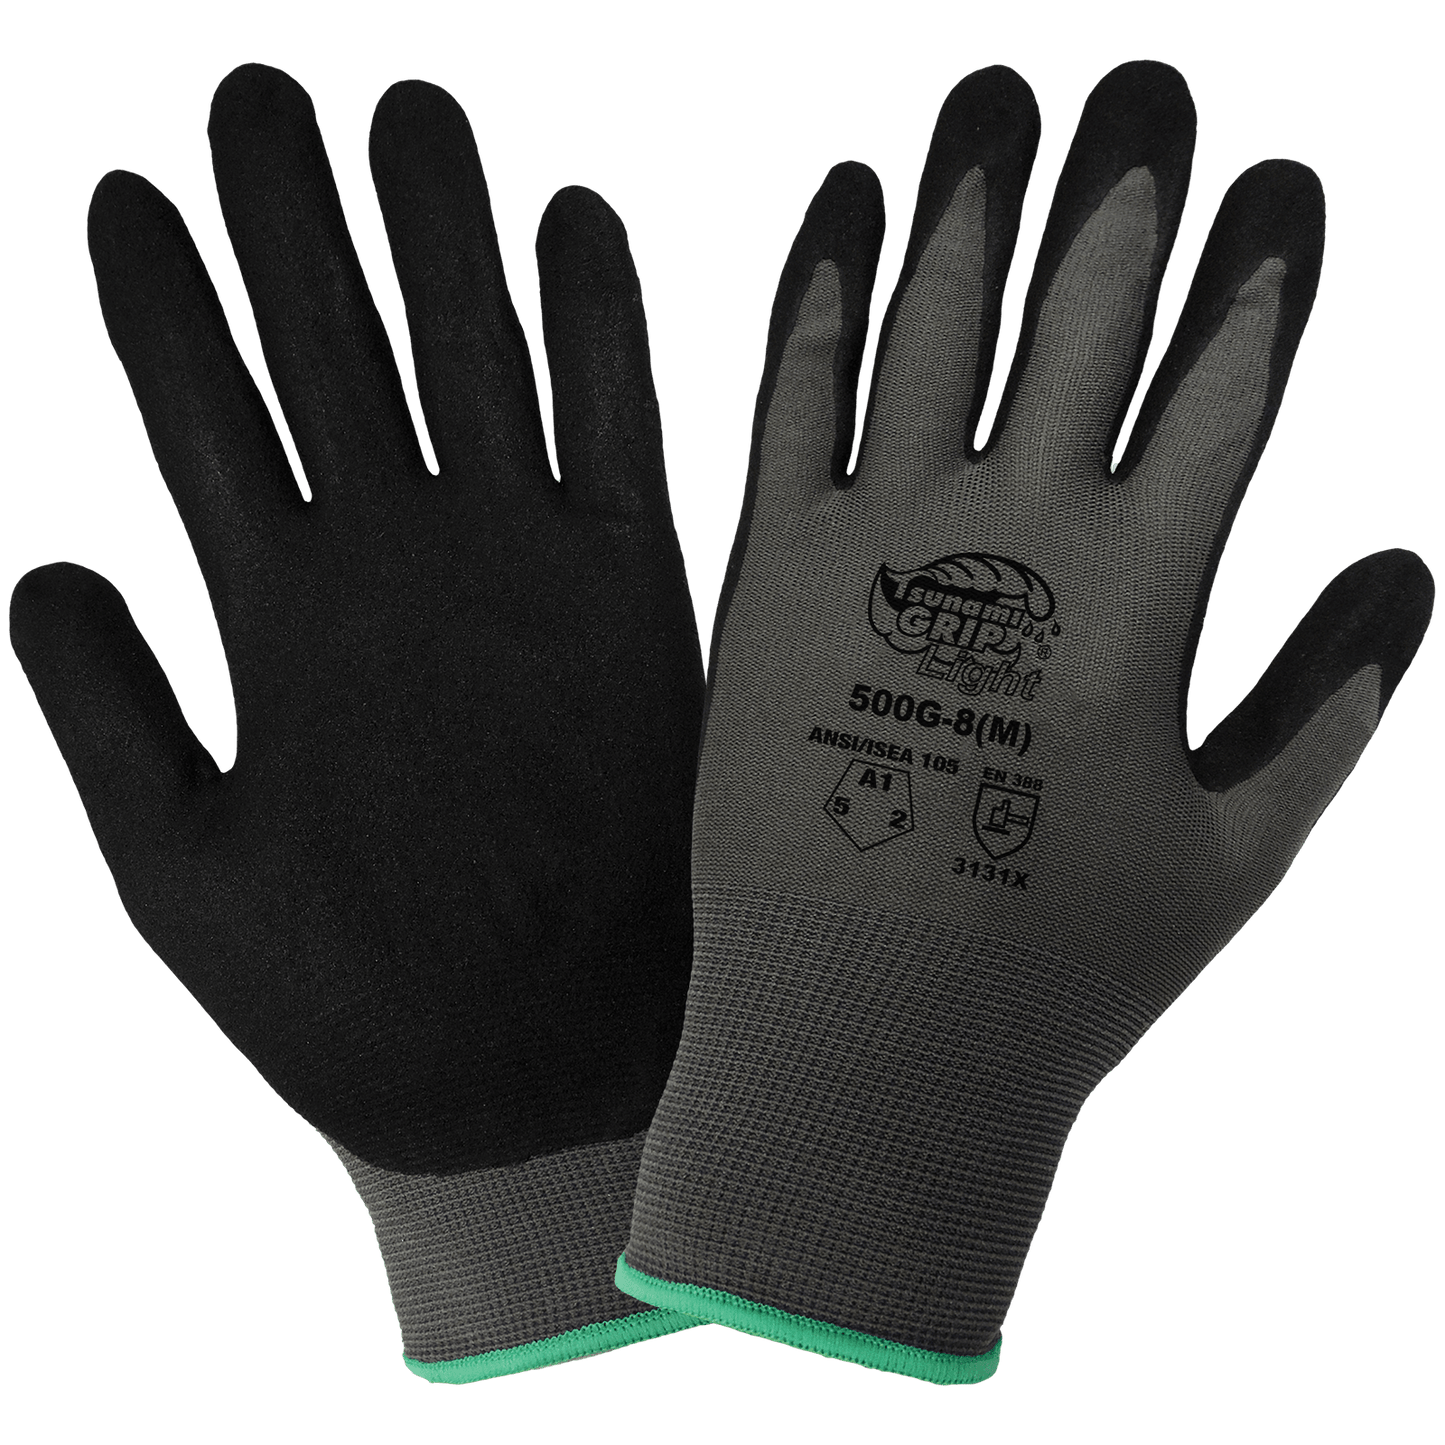 Tsunami Grip® Light Mach Finish Nitrile-Coated Gloves with Cut, Abrasion, and Puncture Resistance - 500G